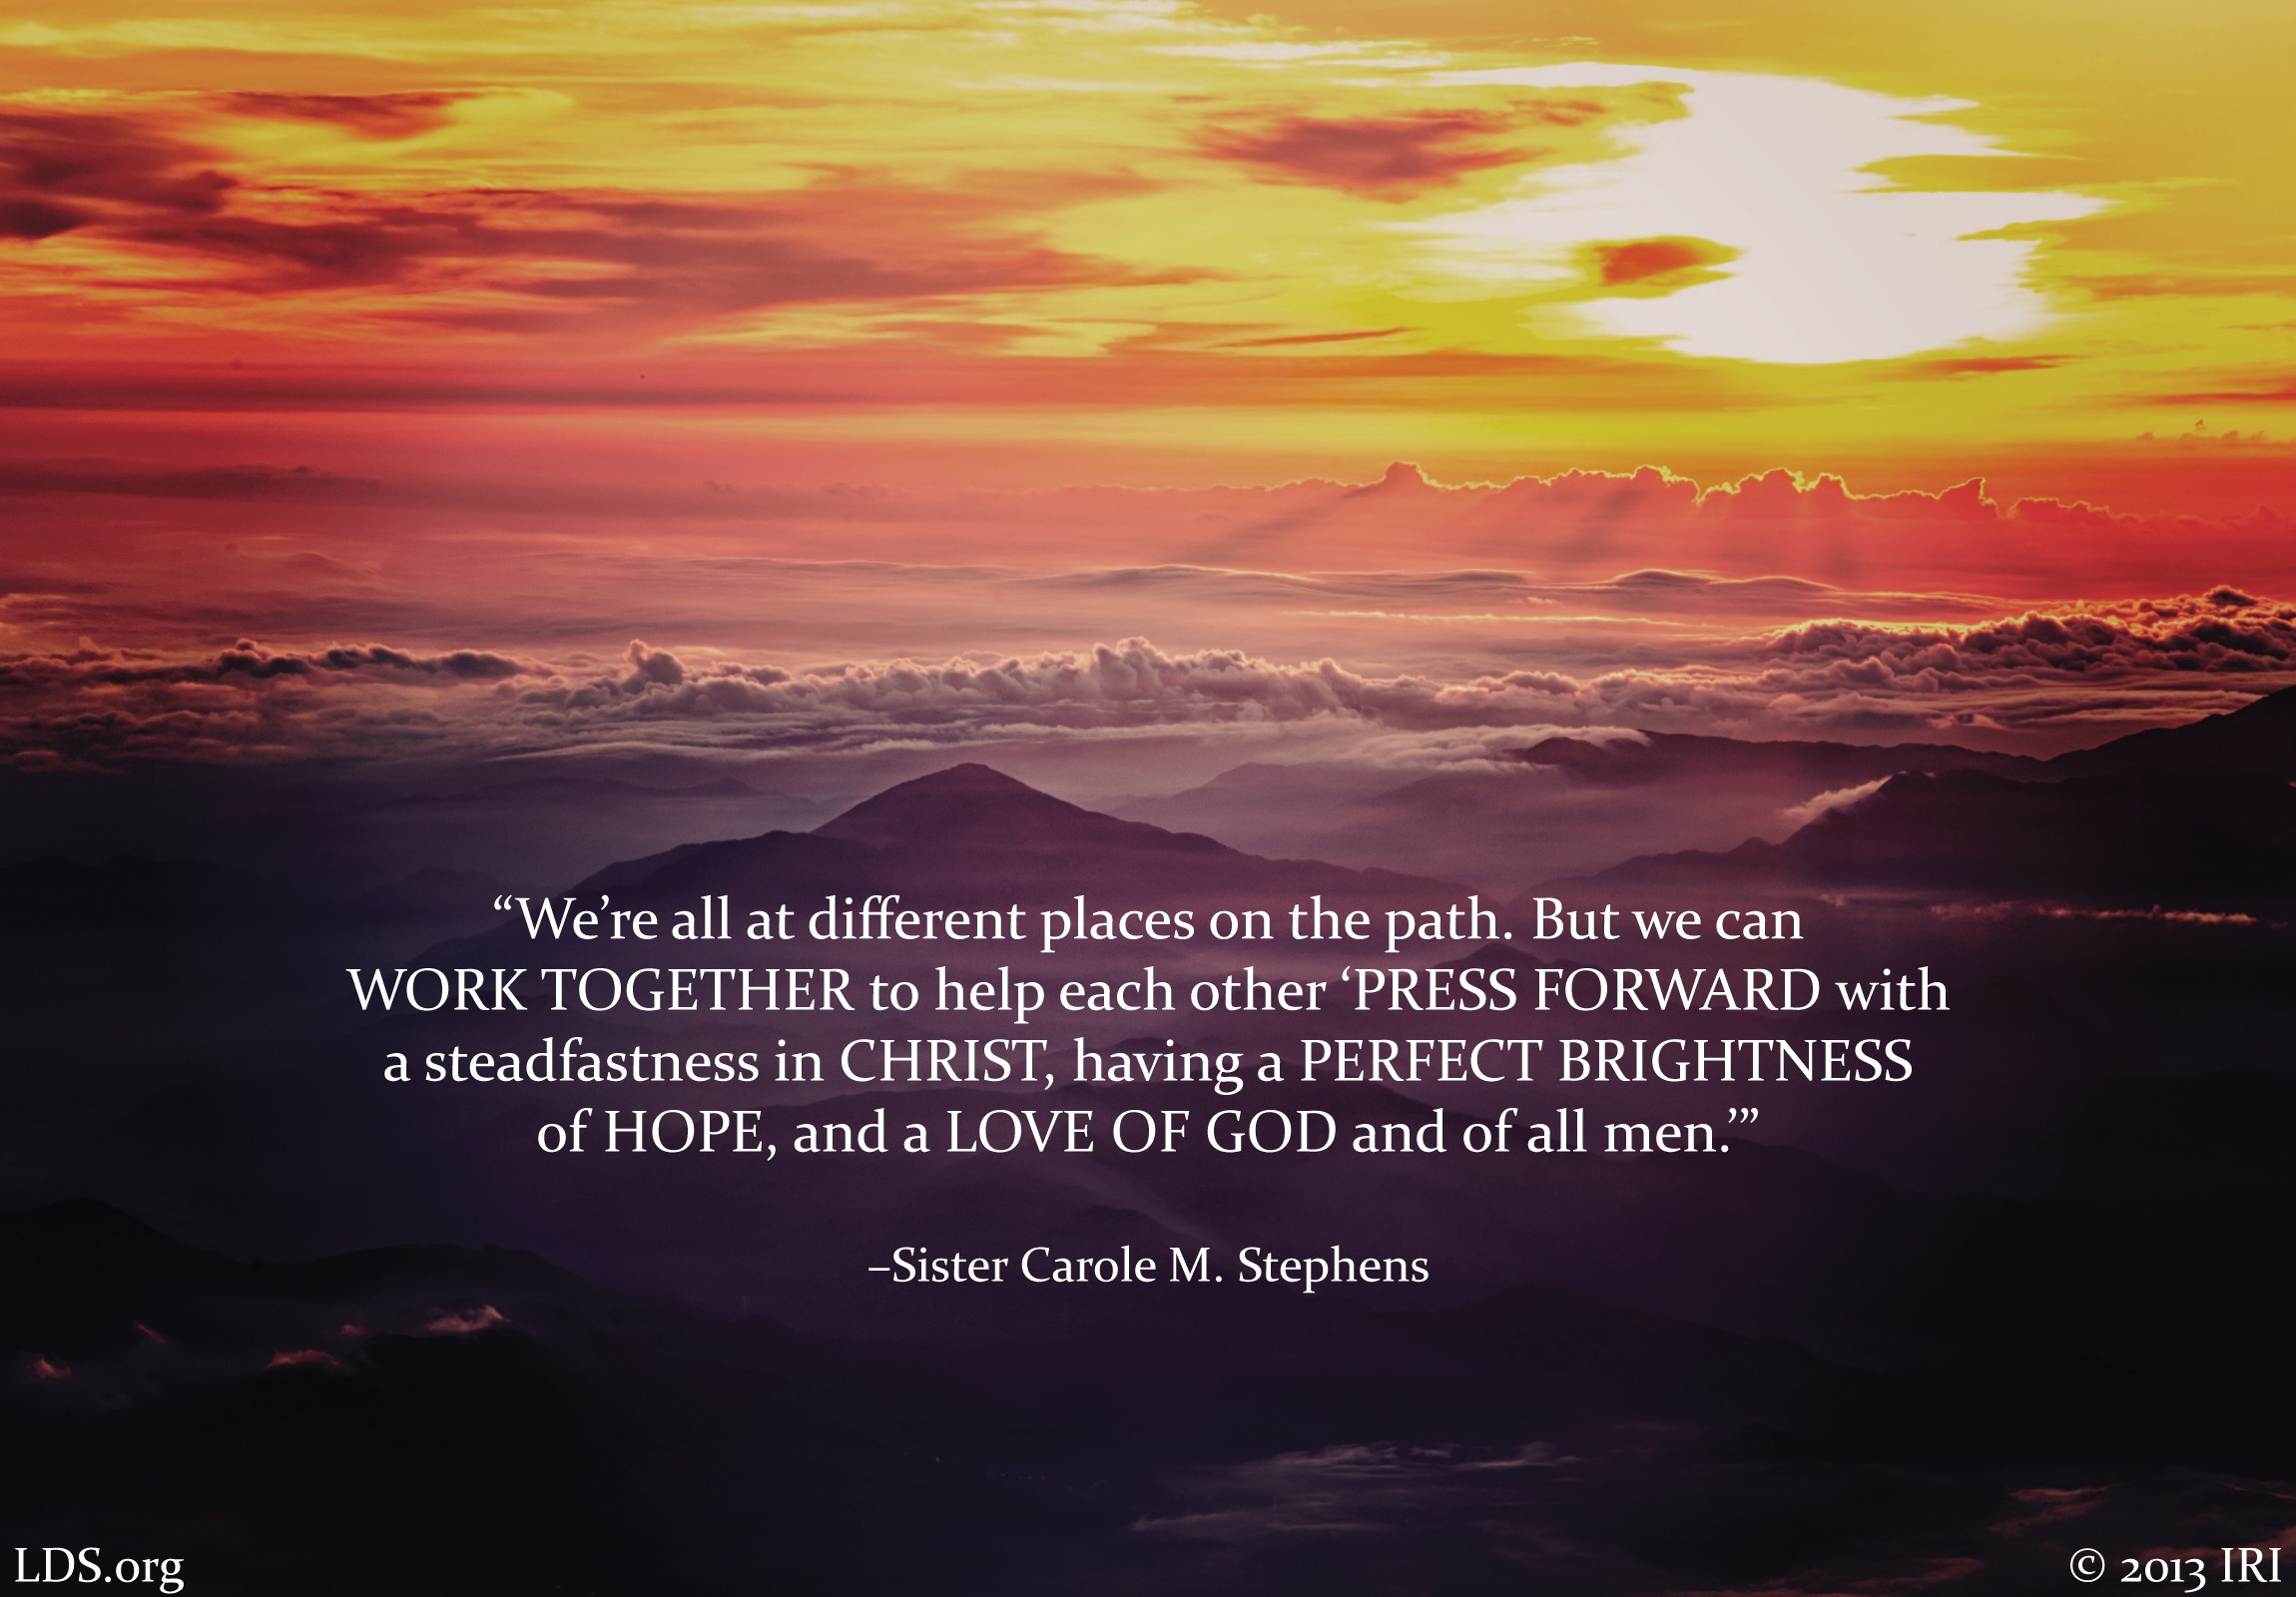 A bird’s-eye view of a sunset, paired with a quote by Sister Carole M. Stephens: “We can work together to … ‘press forward with a steadfastness in Christ.’”